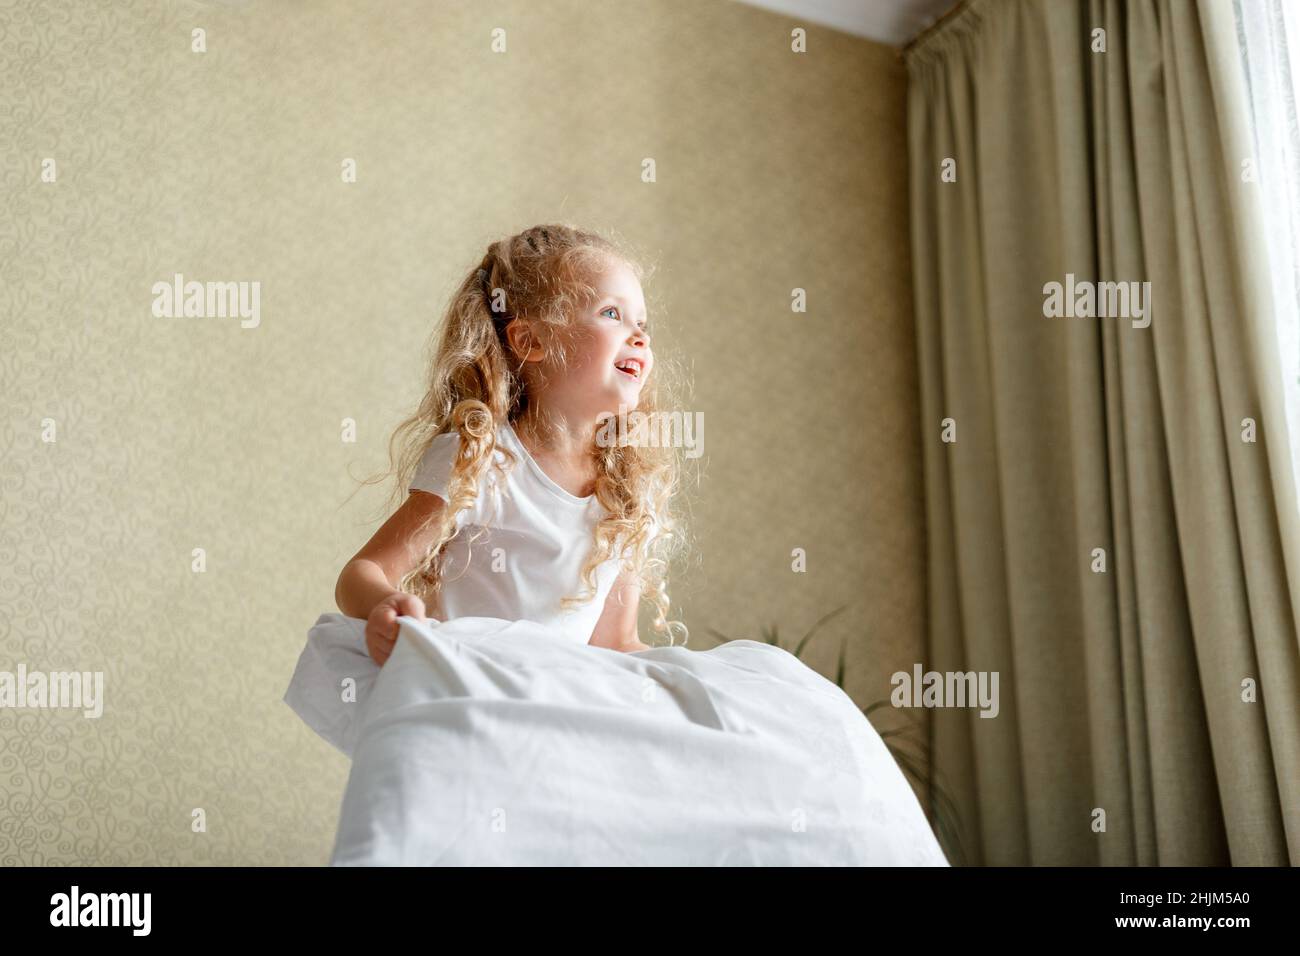 Cheery little Kid girl having fun jumping in bedoom playing with pillow. Portrait of preschool daughter Caucasian blonde girl play in pillows cushions Stock Photo